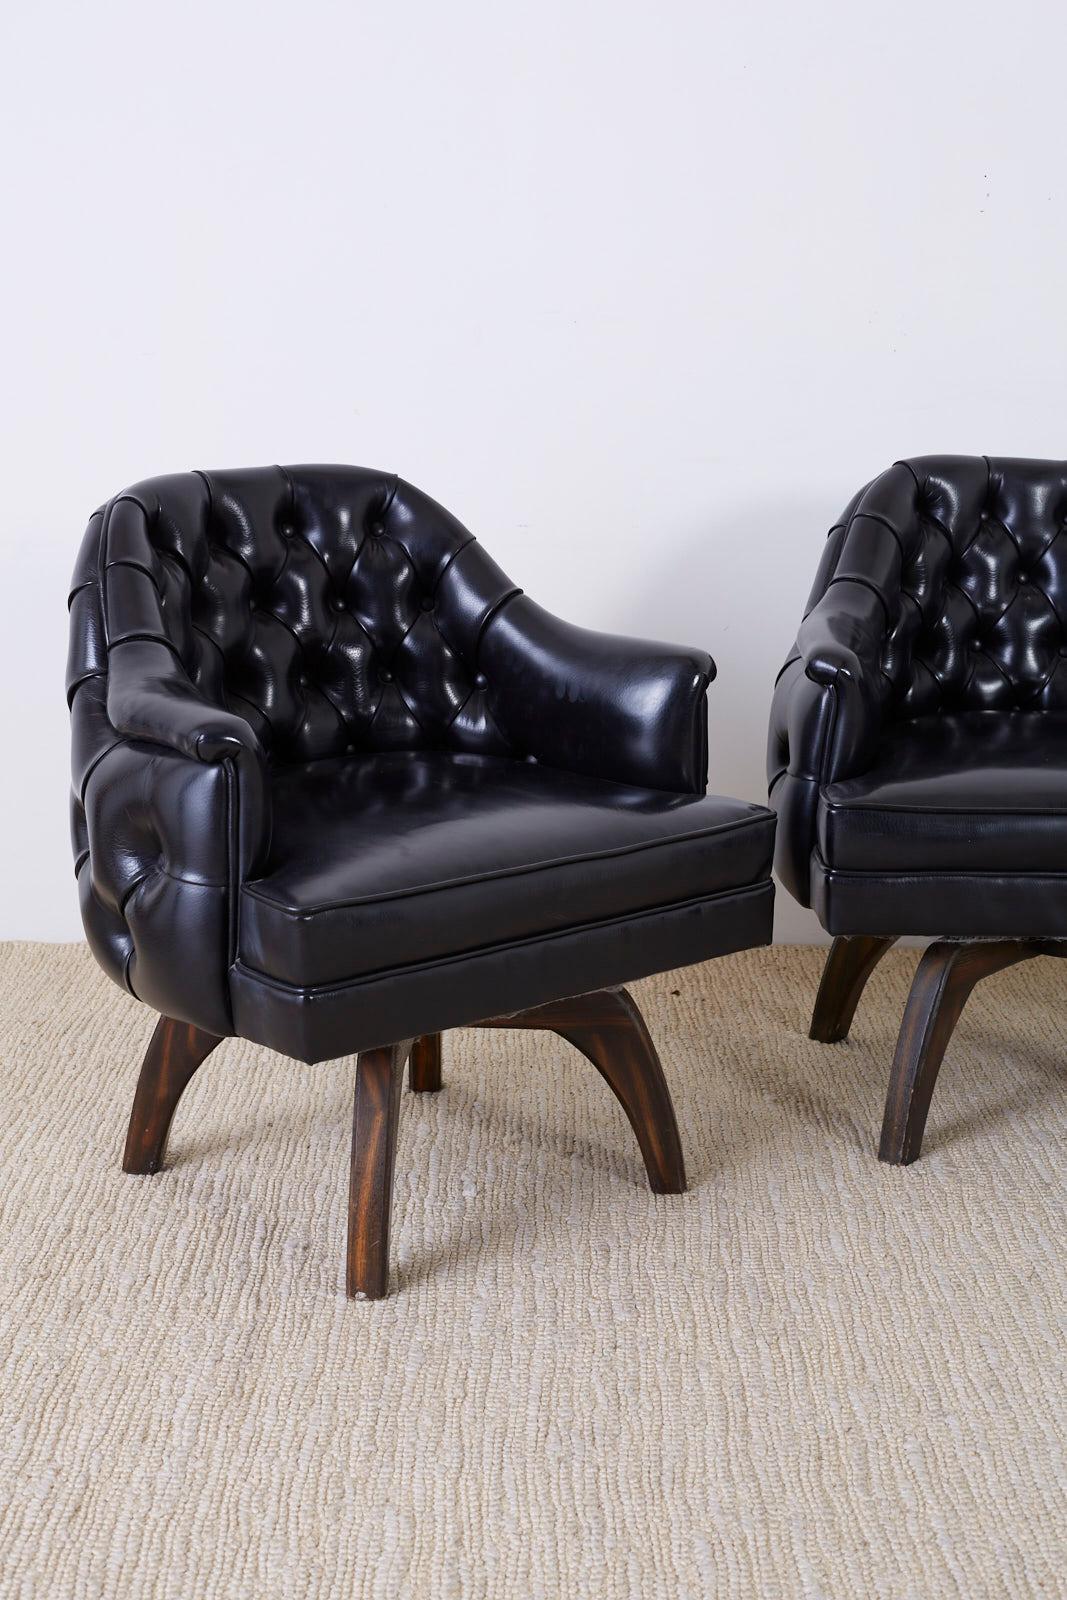 American Set of Three Mid Century Tufted Black Leatherette Club Chairs  For Sale